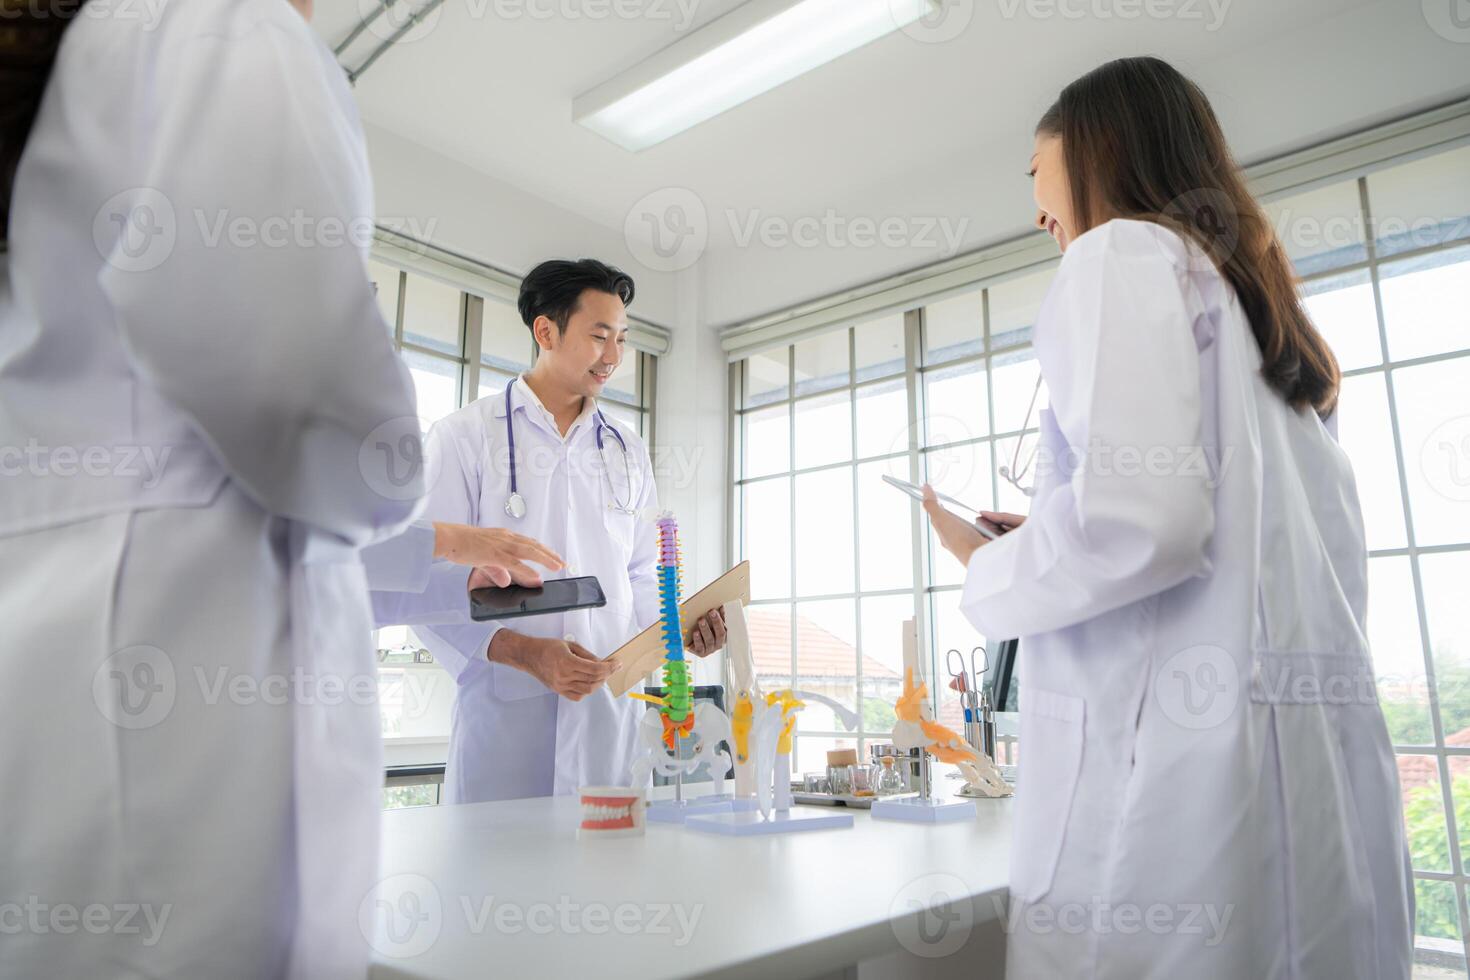 A medical professor is lecturing on a case study related to disease treatment to medical students photo